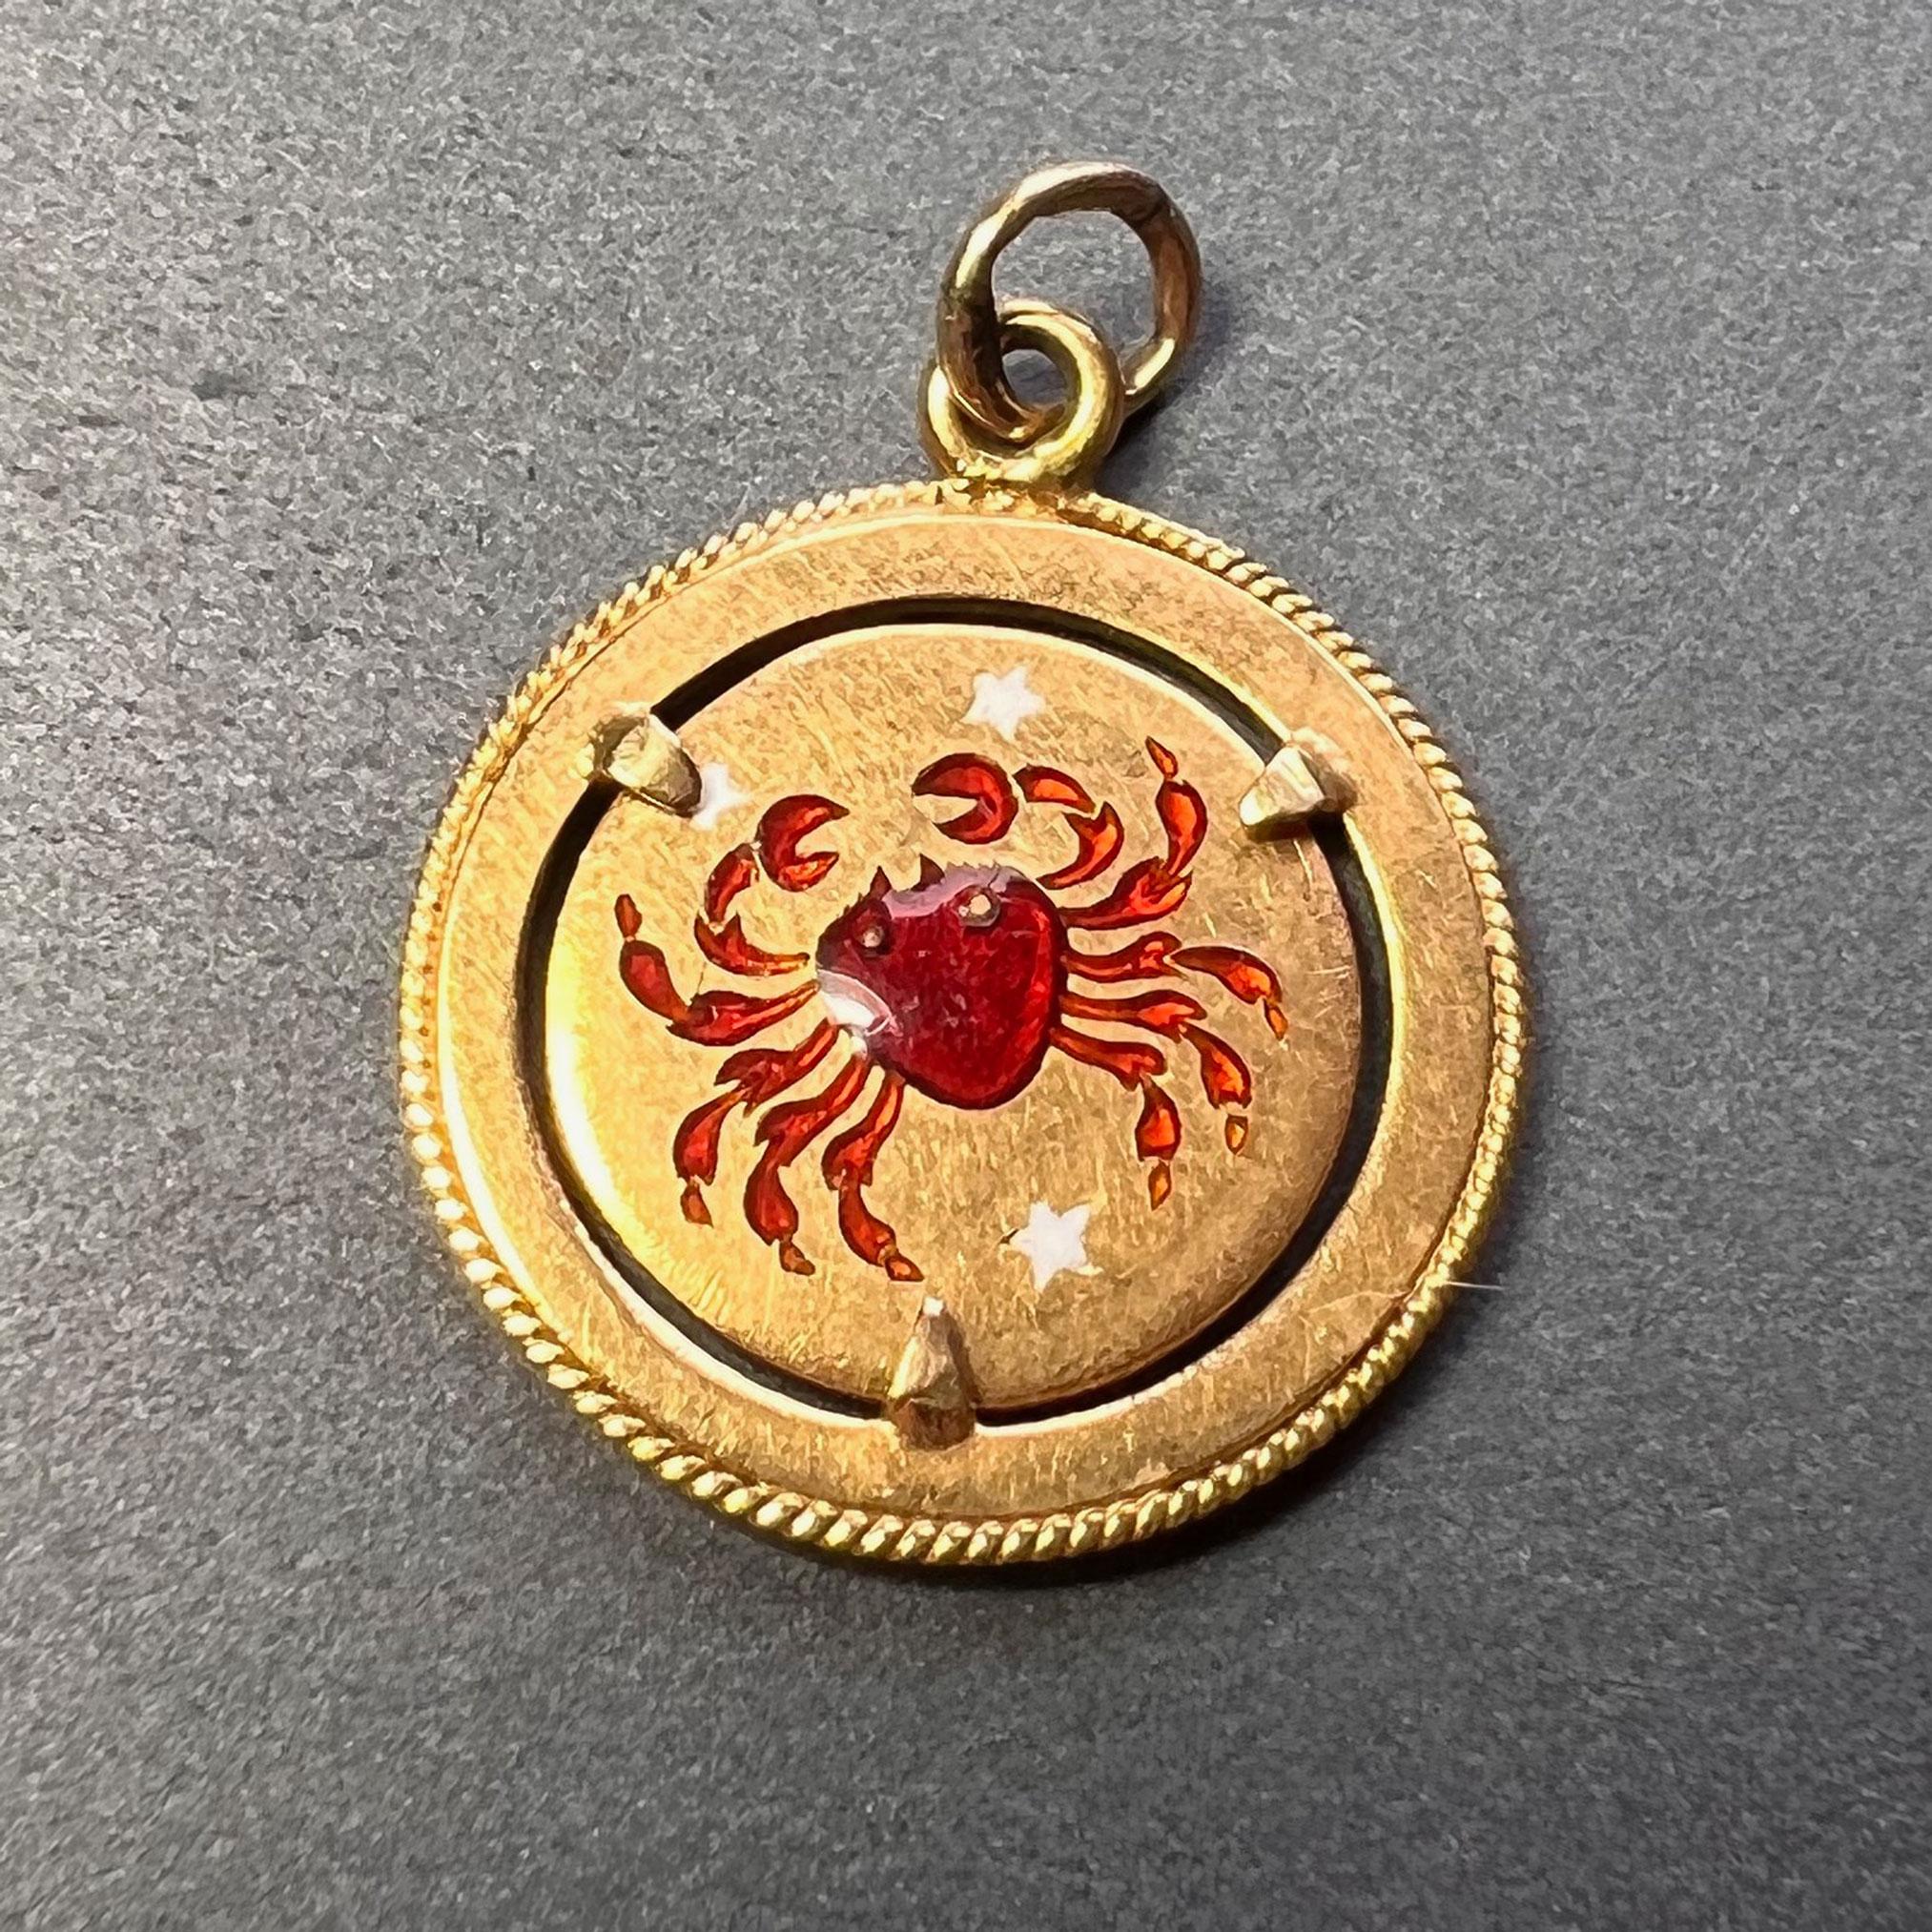 An 18 karat (18K) yellow gold charm pendant designed as a gold disc with enamel crab representing the zodiac starsign of Cancer with three white enamel stars within a gold frame mount with twisted wire edge detail. Stamped 750 for 18 karat gold and